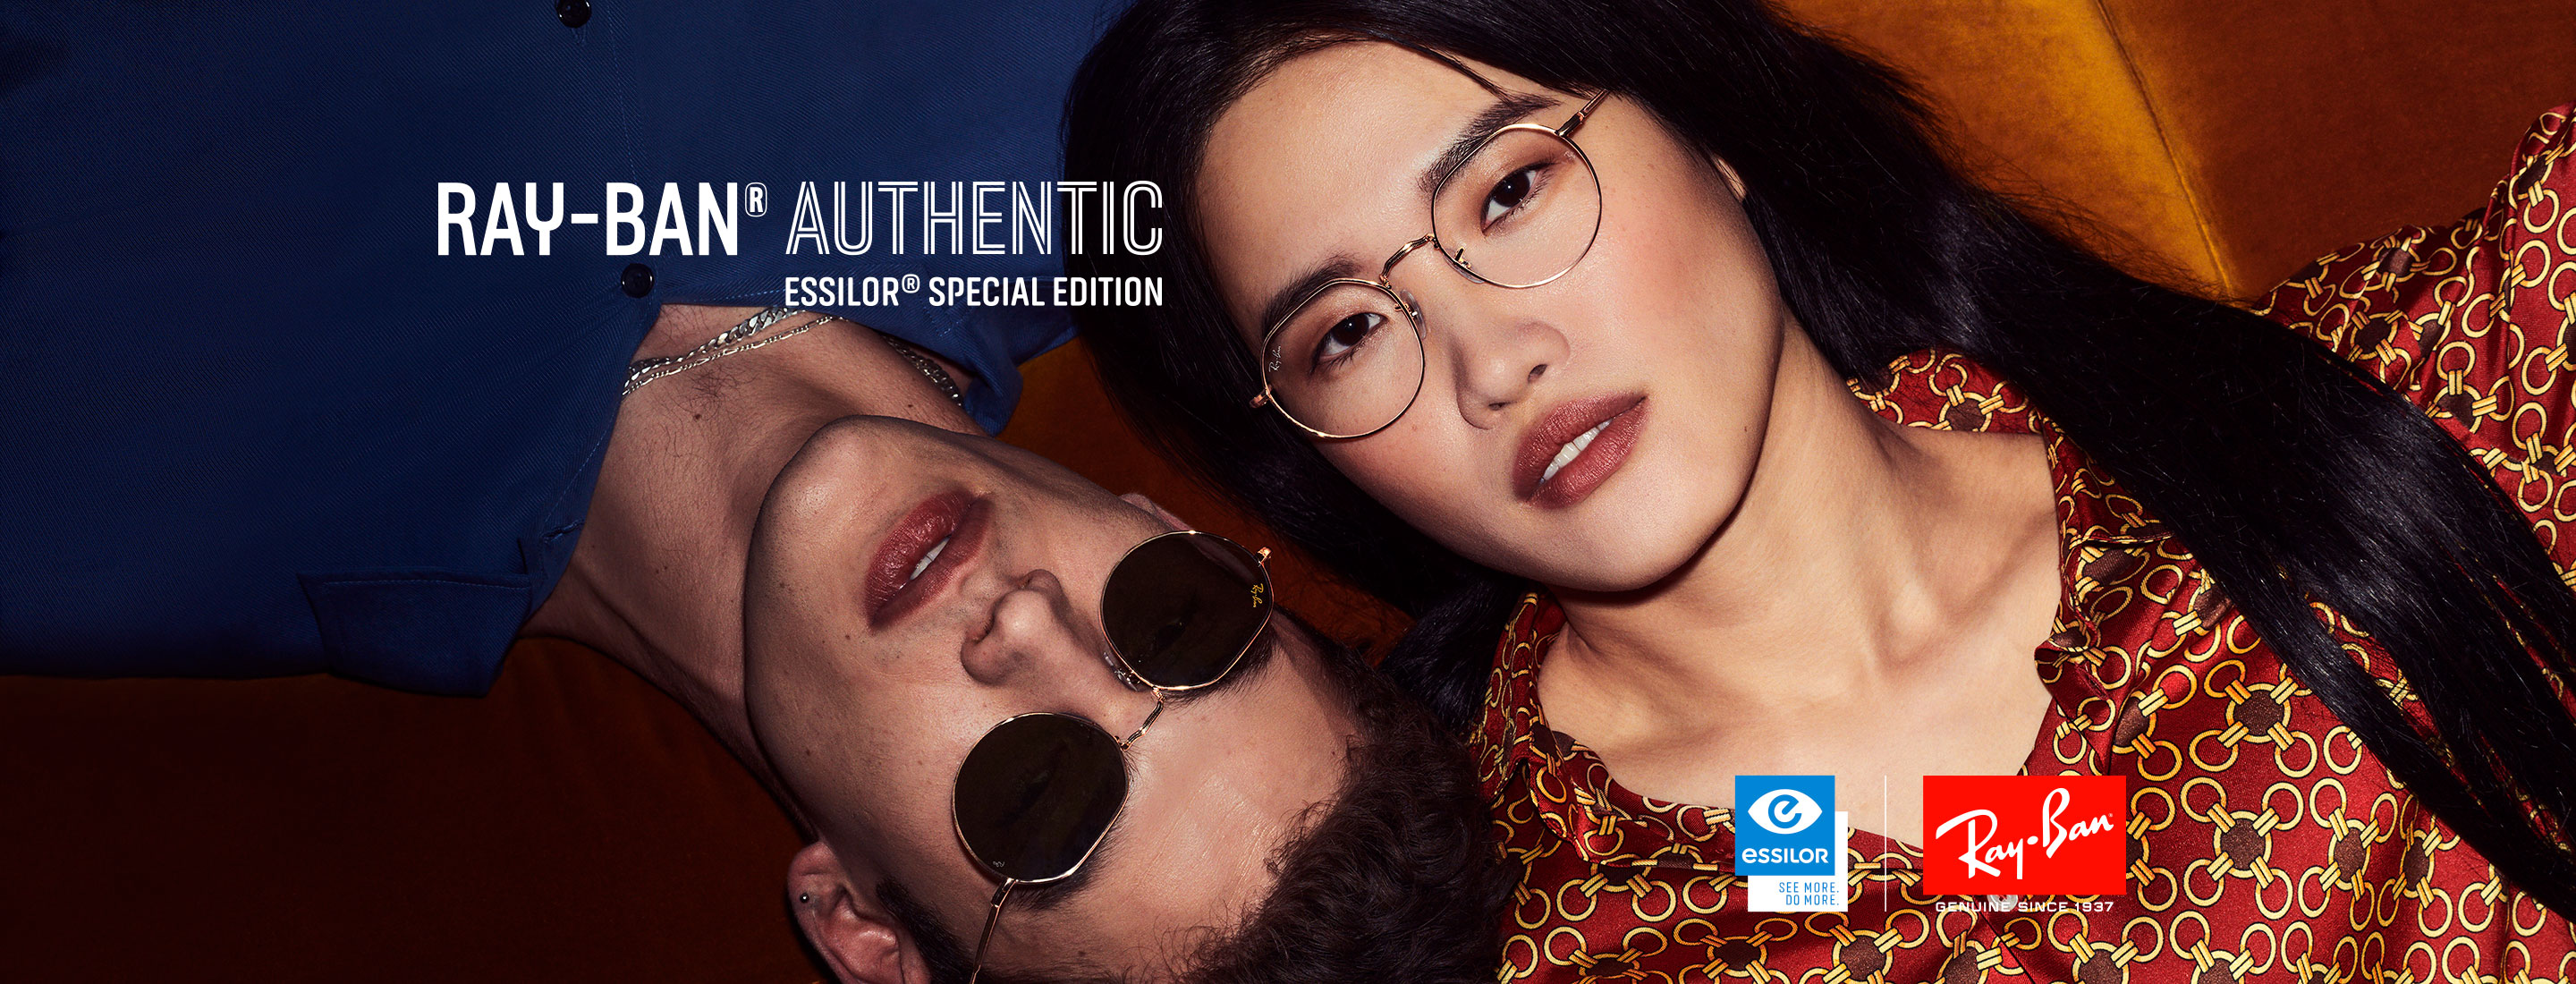 Ray-Ban® Authentic | Essilor® Special Edition